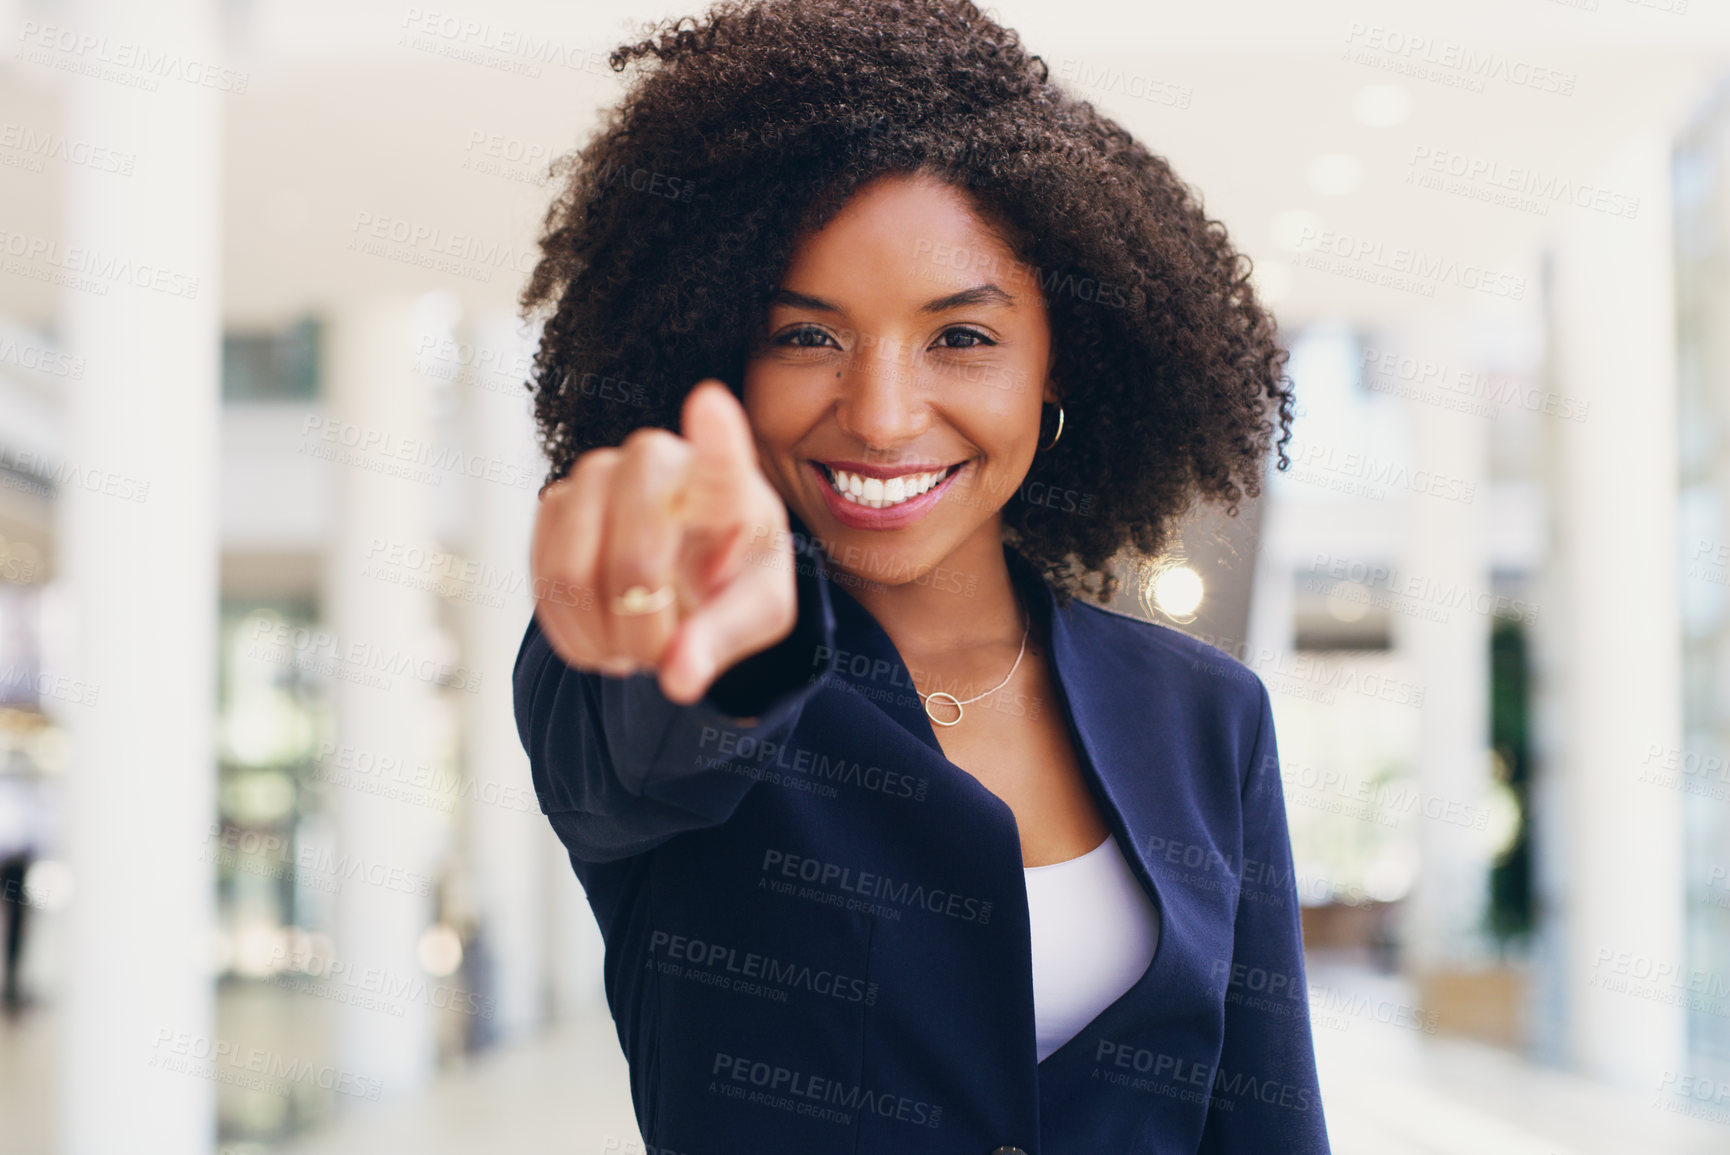 Buy stock photo Cropped portrait of an attractive young businesswoman standing and pointing while in the office during the day